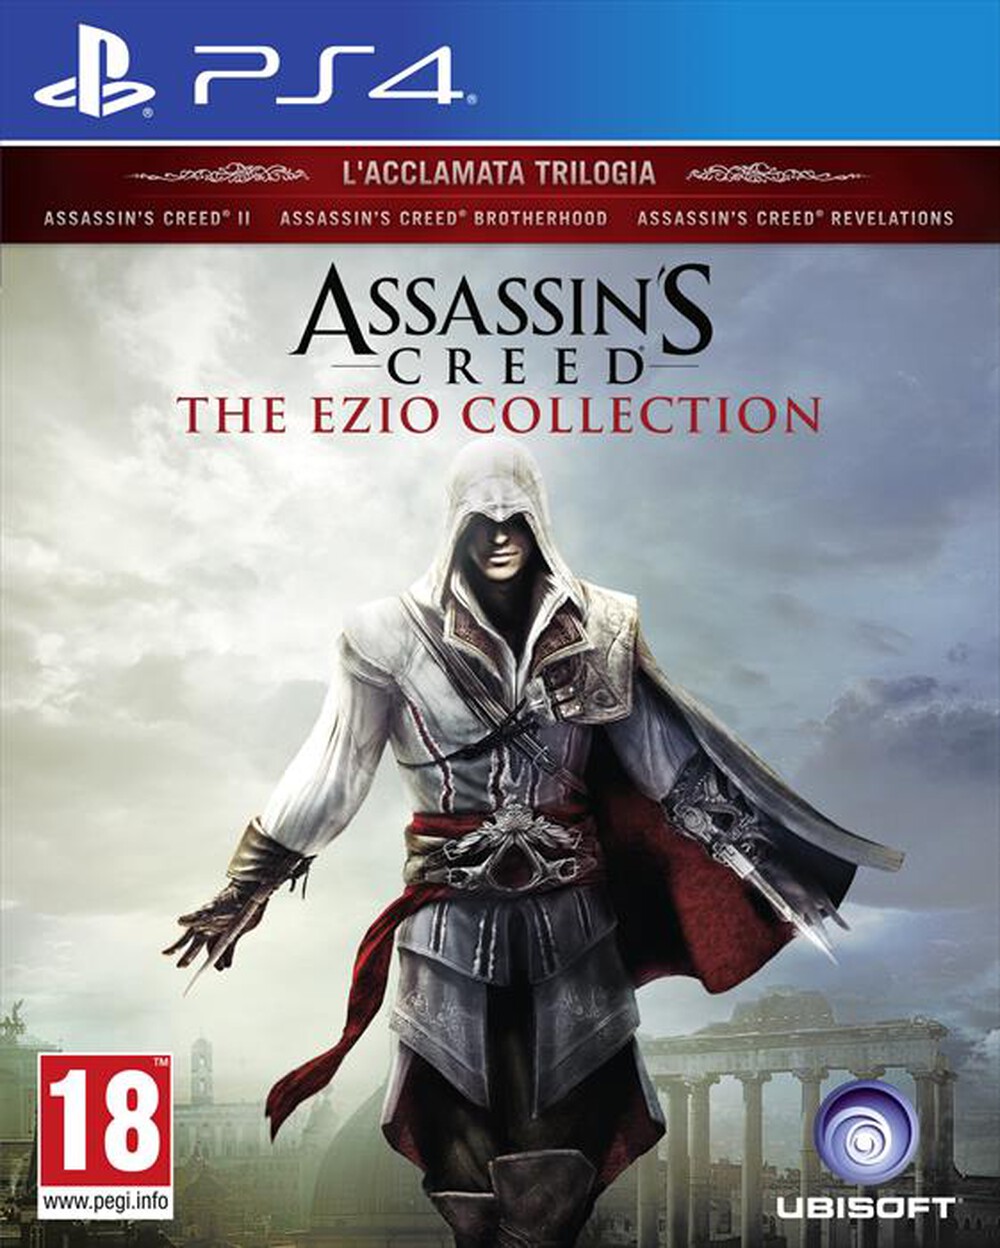 "UBISOFT - Assassin's Creed - The Ezio Collection PS4"